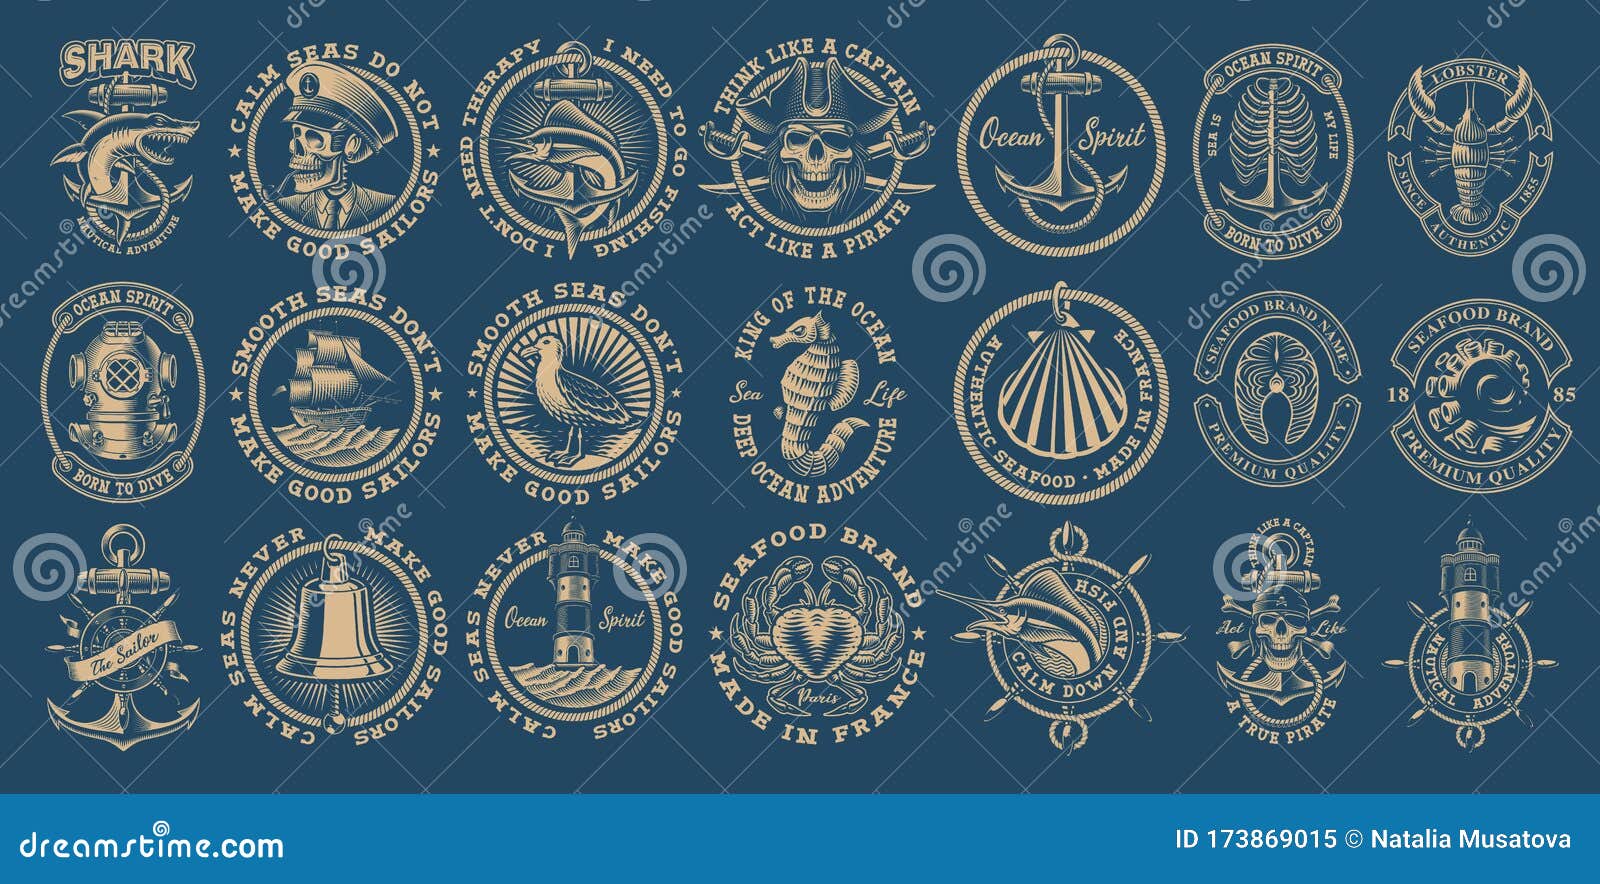 the biggest bundle of vintage nautical s on the dark background.